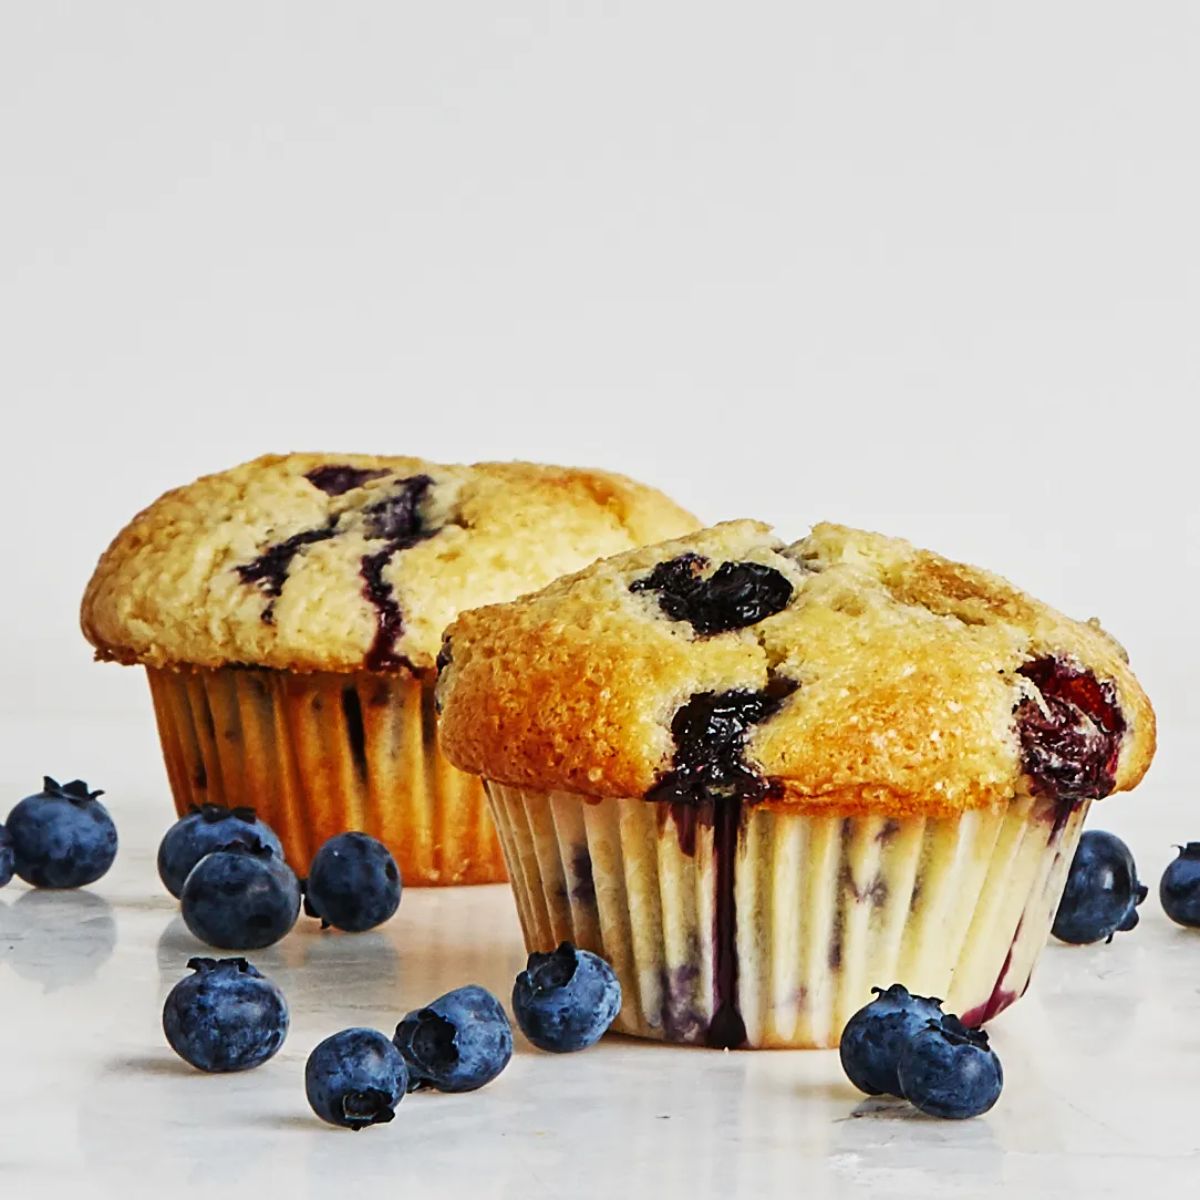 Tasty sour cream classic blueberry muffins on a table.